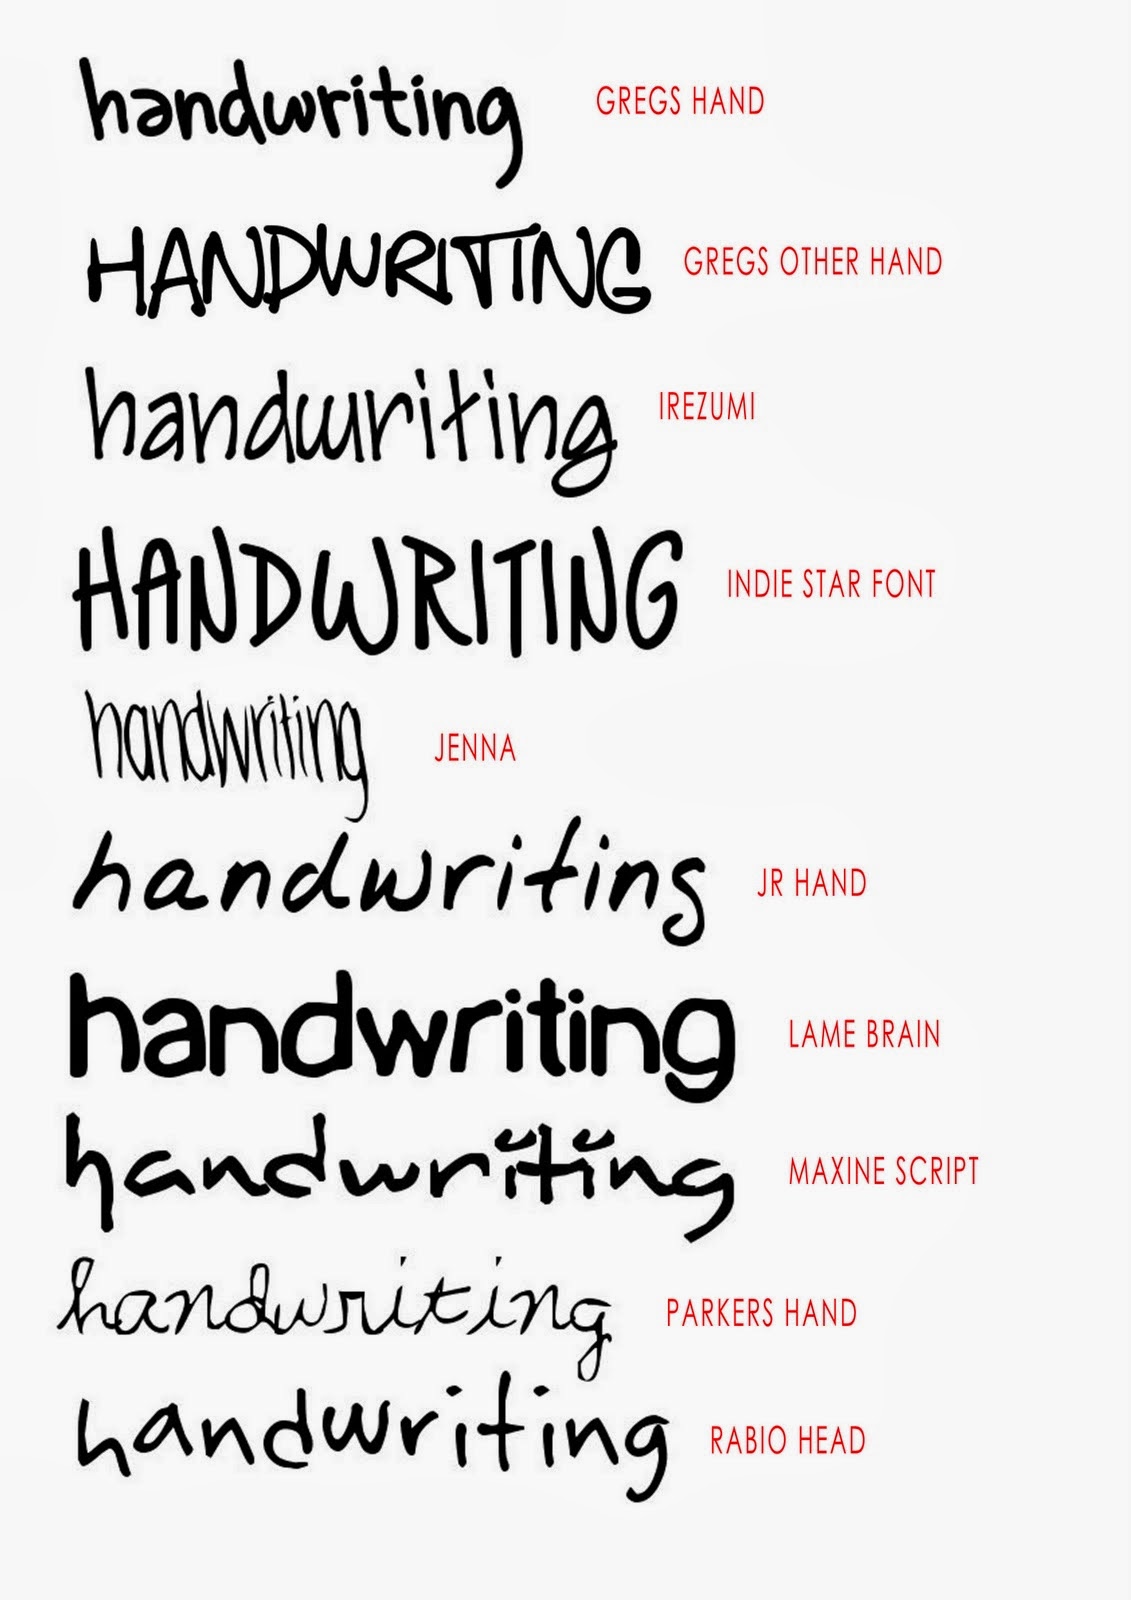 Cursive vs. Printing: Is One Better Than the Other?